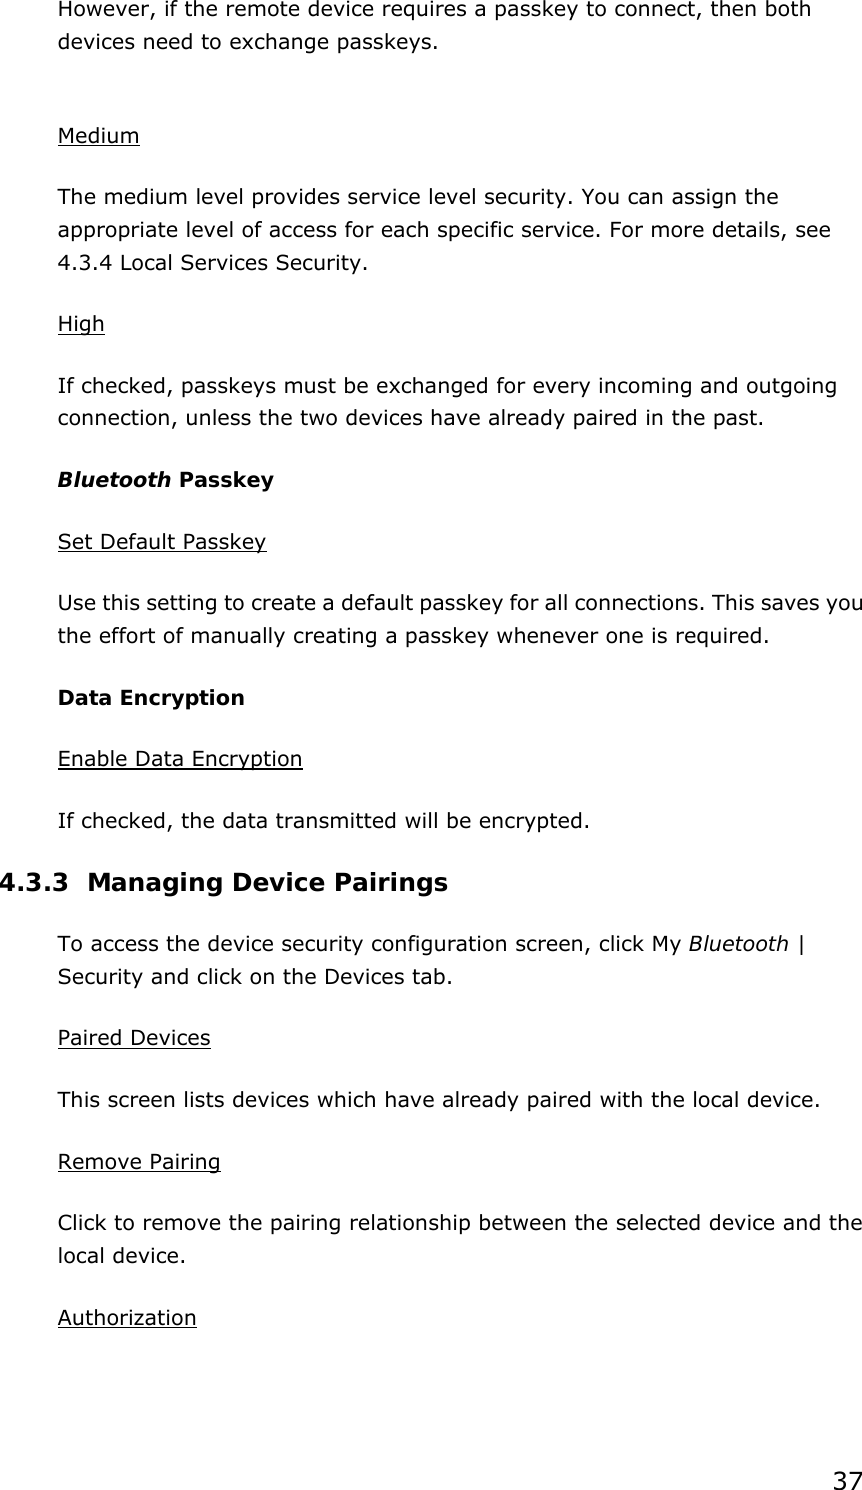 37 However, if the remote device requires a passkey to connect, then both devices need to exchange passkeys.  Medium The medium level provides service level security. You can assign the appropriate level of access for each specific service. For more details, see 4.3.4 Local Services Security.   High If checked, passkeys must be exchanged for every incoming and outgoing connection, unless the two devices have already paired in the past.   Bluetooth Passkey Set Default Passkey Use this setting to create a default passkey for all connections. This saves you the effort of manually creating a passkey whenever one is required. Data Encryption Enable Data Encryption If checked, the data transmitted will be encrypted. 4.3.3 Managing Device Pairings To access the device security configuration screen, click My Bluetooth | Security and click on the Devices tab. Paired Devices This screen lists devices which have already paired with the local device. Remove Pairing Click to remove the pairing relationship between the selected device and the local device. Authorization 